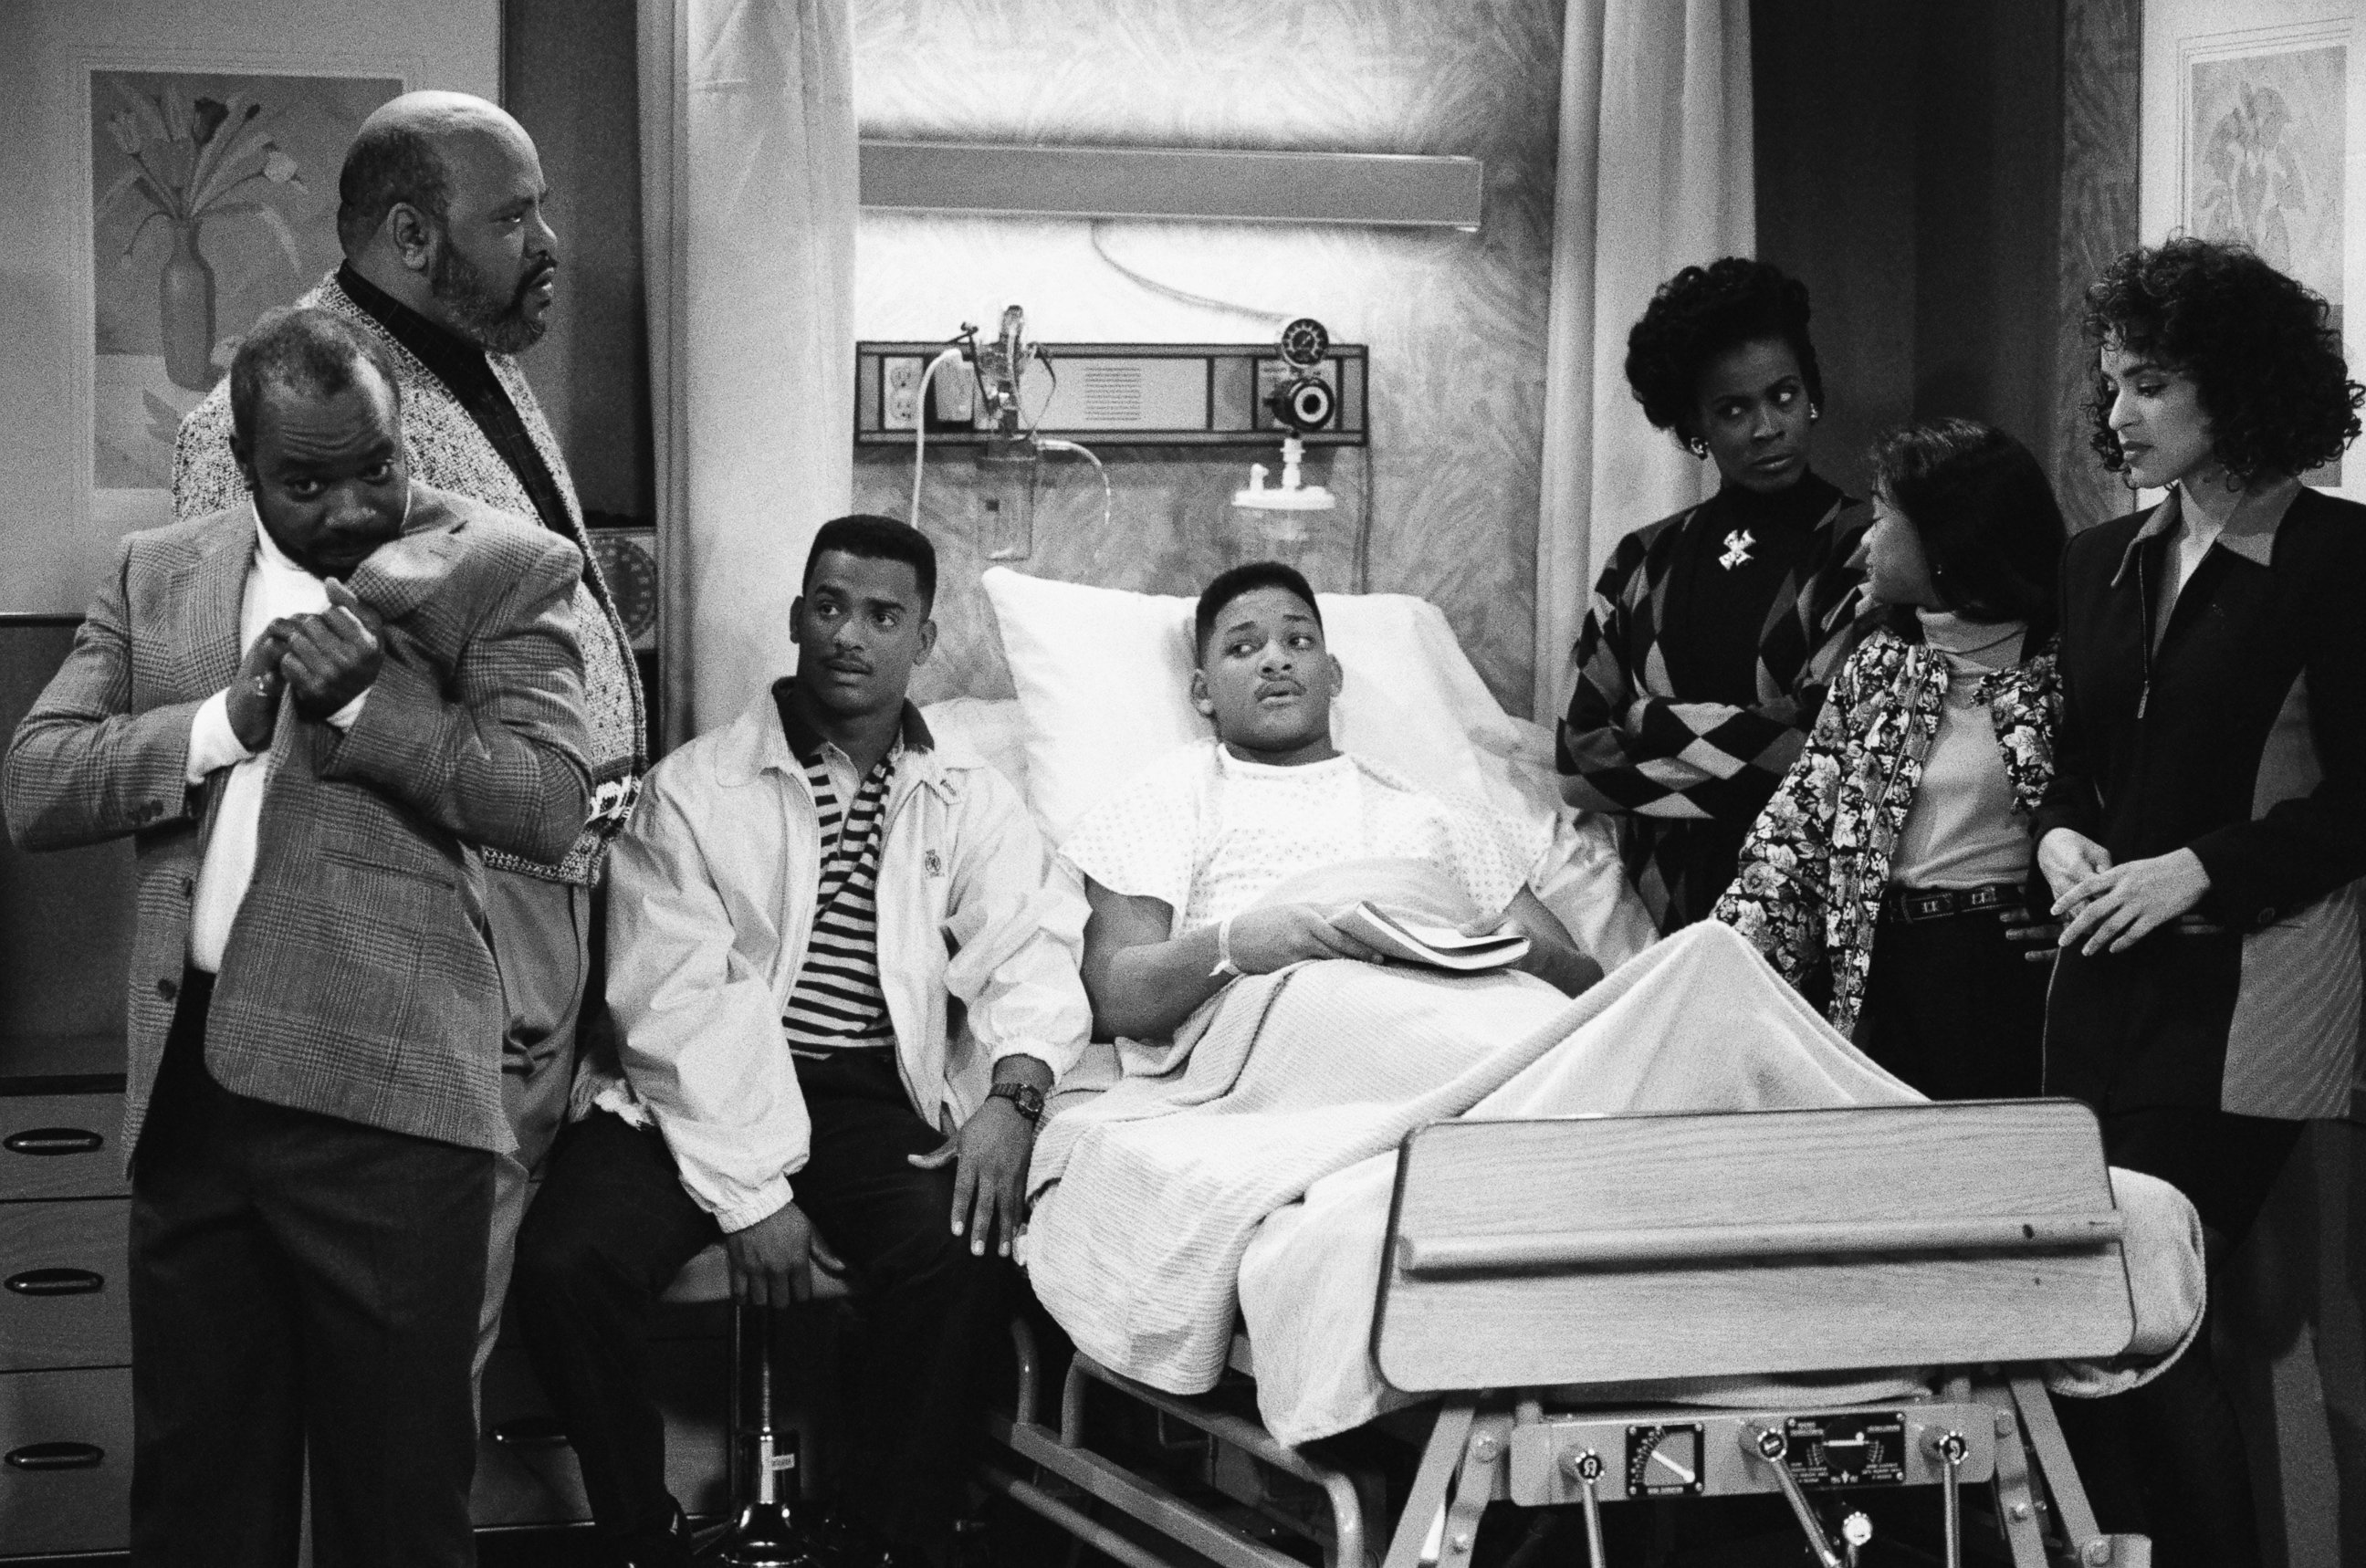 PHOTO: From the left, Joseph Marcell as Geoffrey, James Avery as Philip Banks, Alfonso Ribeiro as Carlton Banks, Will Smith as William 'Will' Smith, Janet Hubert as Vivian Banks, Tatyana Ali as Ashley Banks, Karyn Parsons in "The Fresh Prince of Bel-Air."